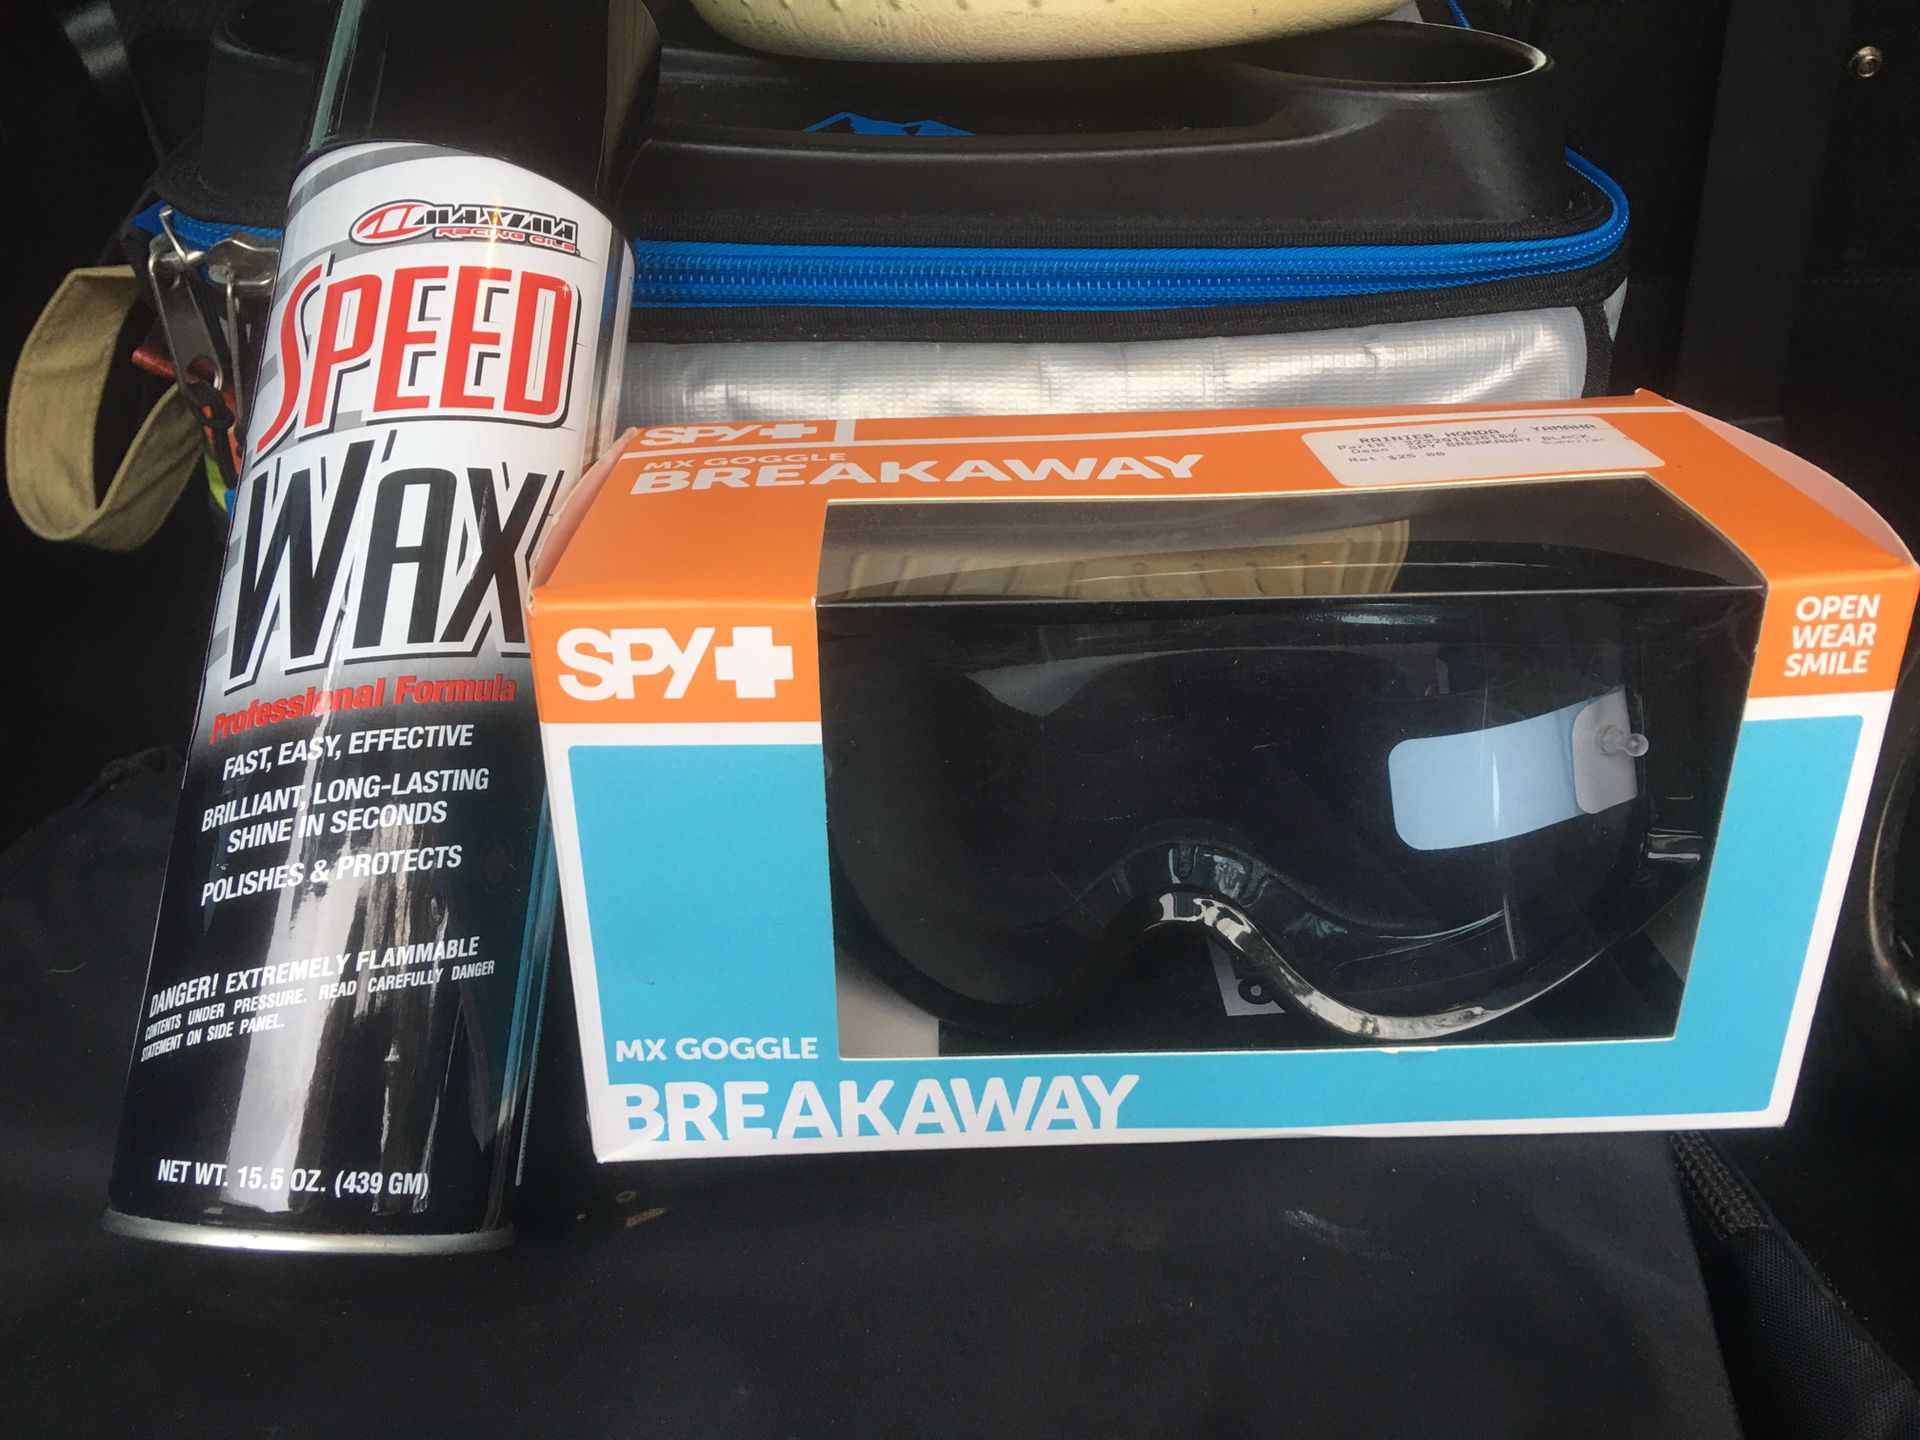 Goggles and speed wax